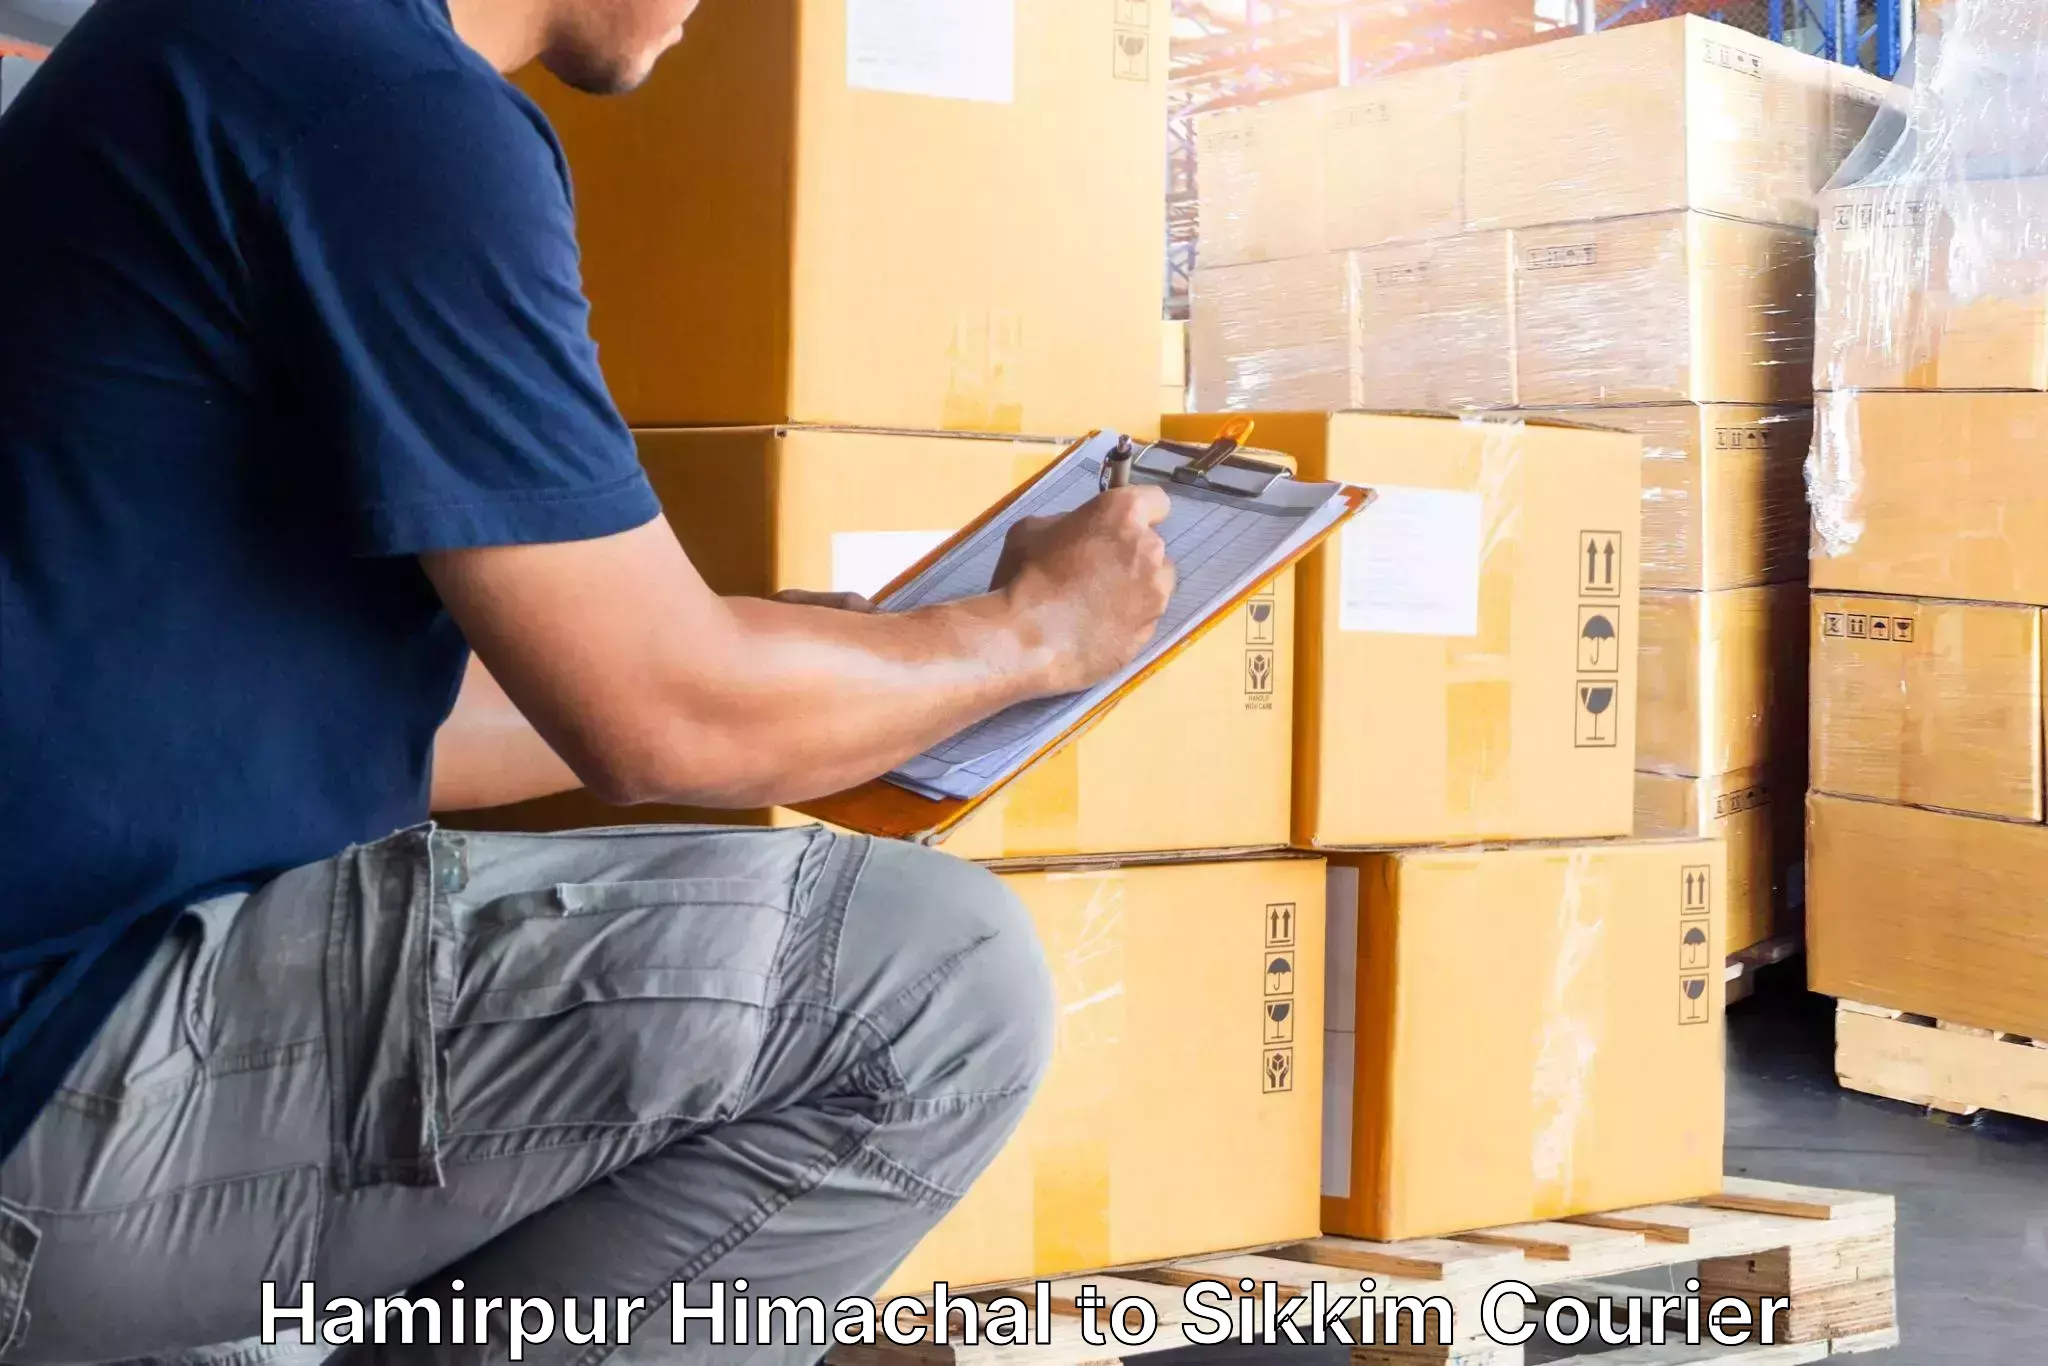 Full-service movers Hamirpur Himachal to Sikkim